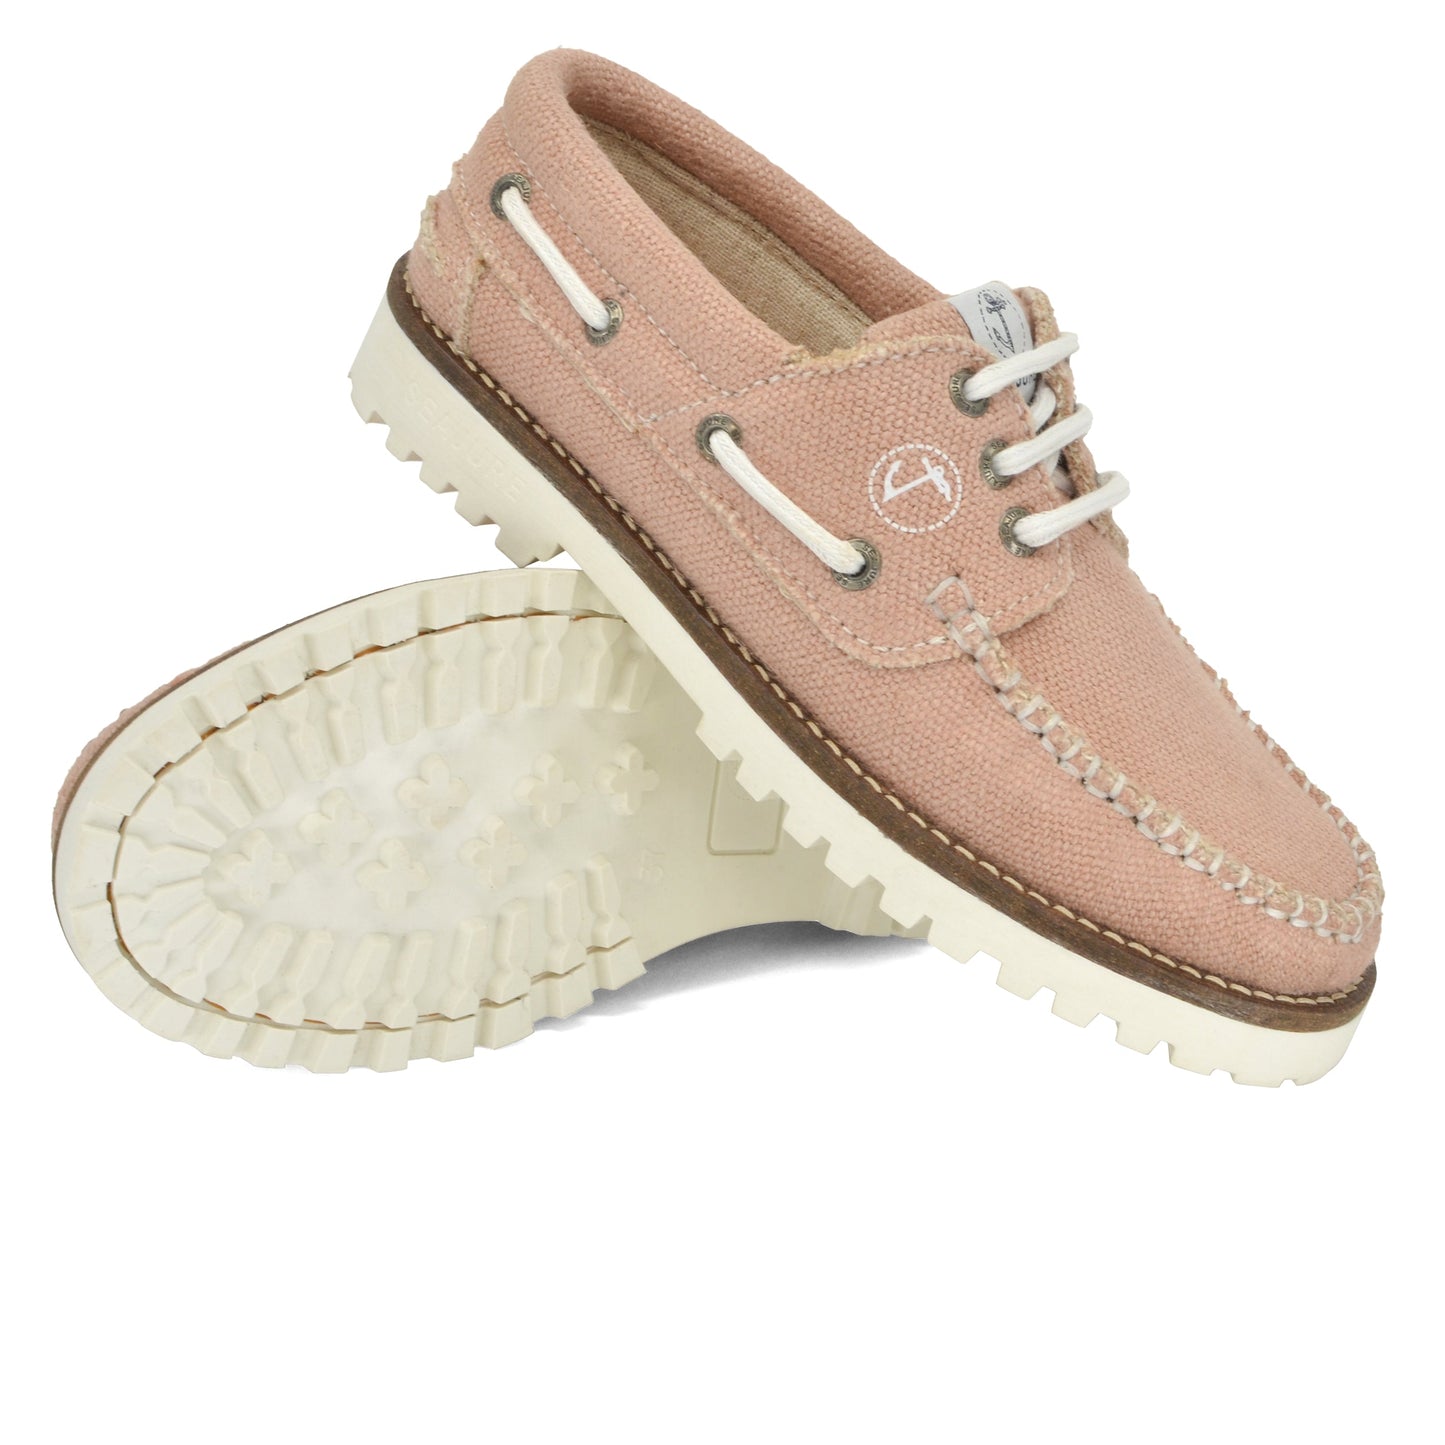 A pair of Women Hemp & Vegan Boat Shoe Pasjaca from Amethyst Hestia, with light pink fabric, white laces and a white sole, displayed on a white background.